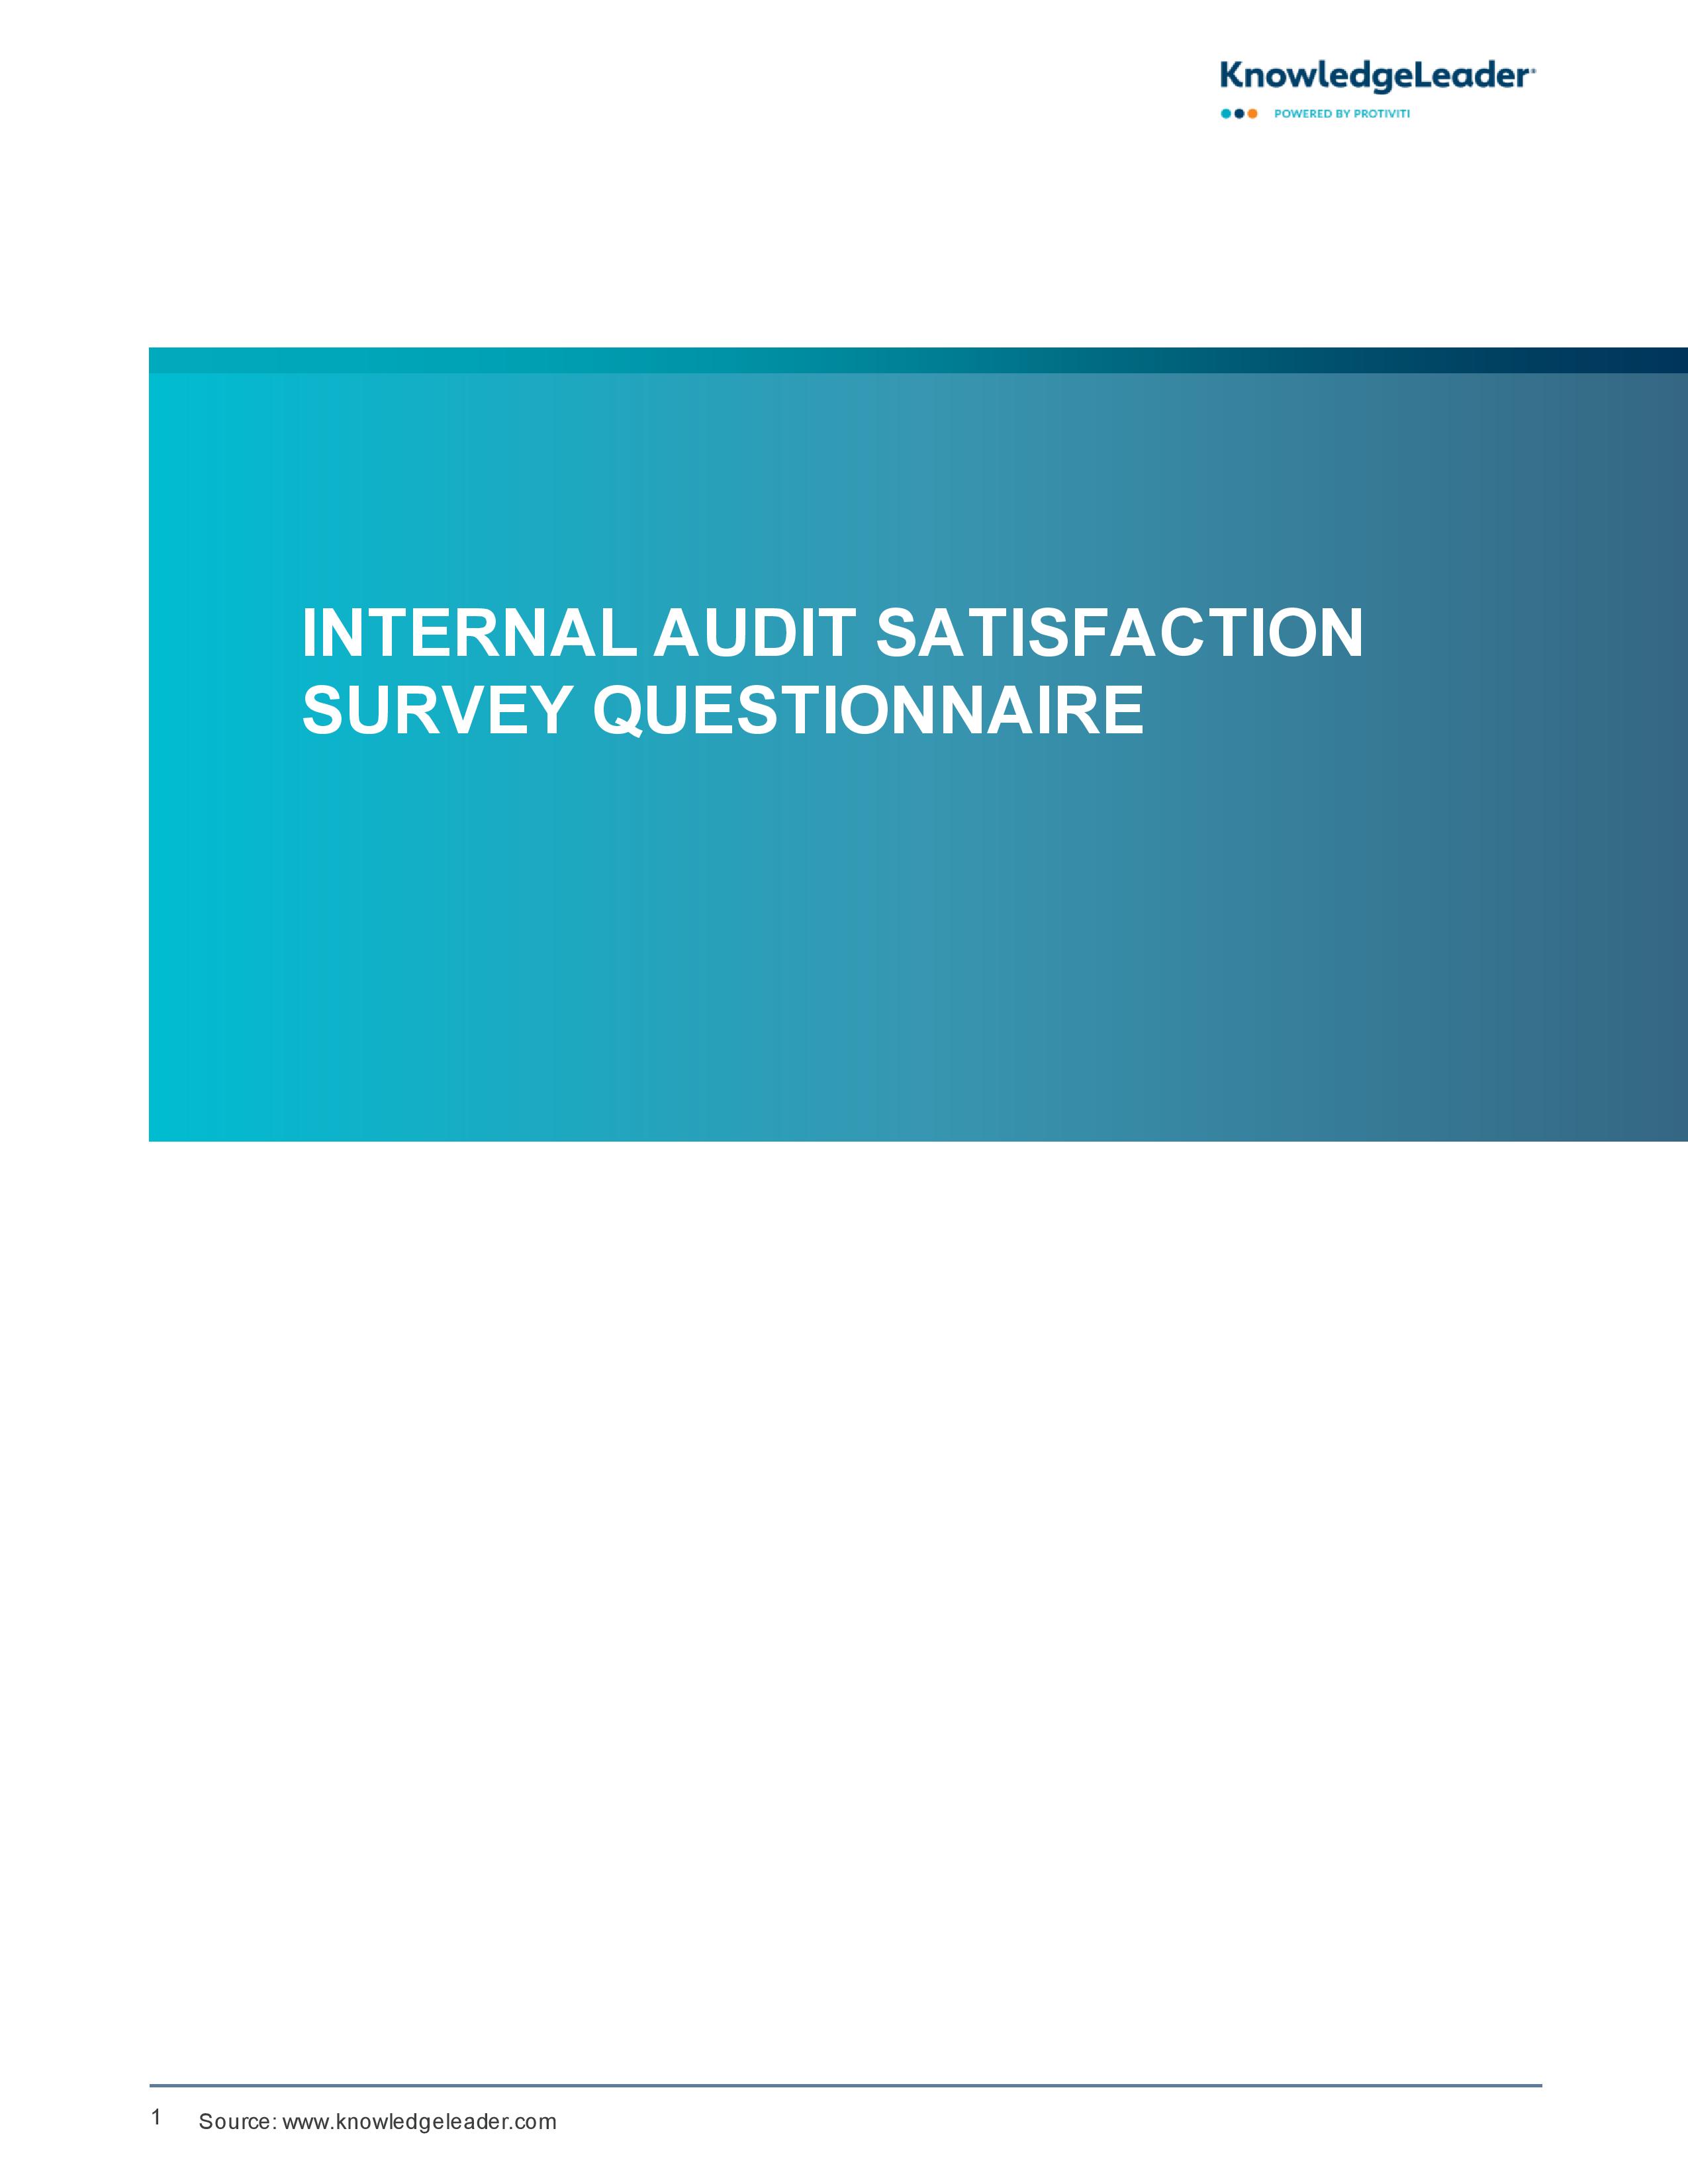 Screenshot of the first page of Internal Audit Satisfaction Survey Questionnaire